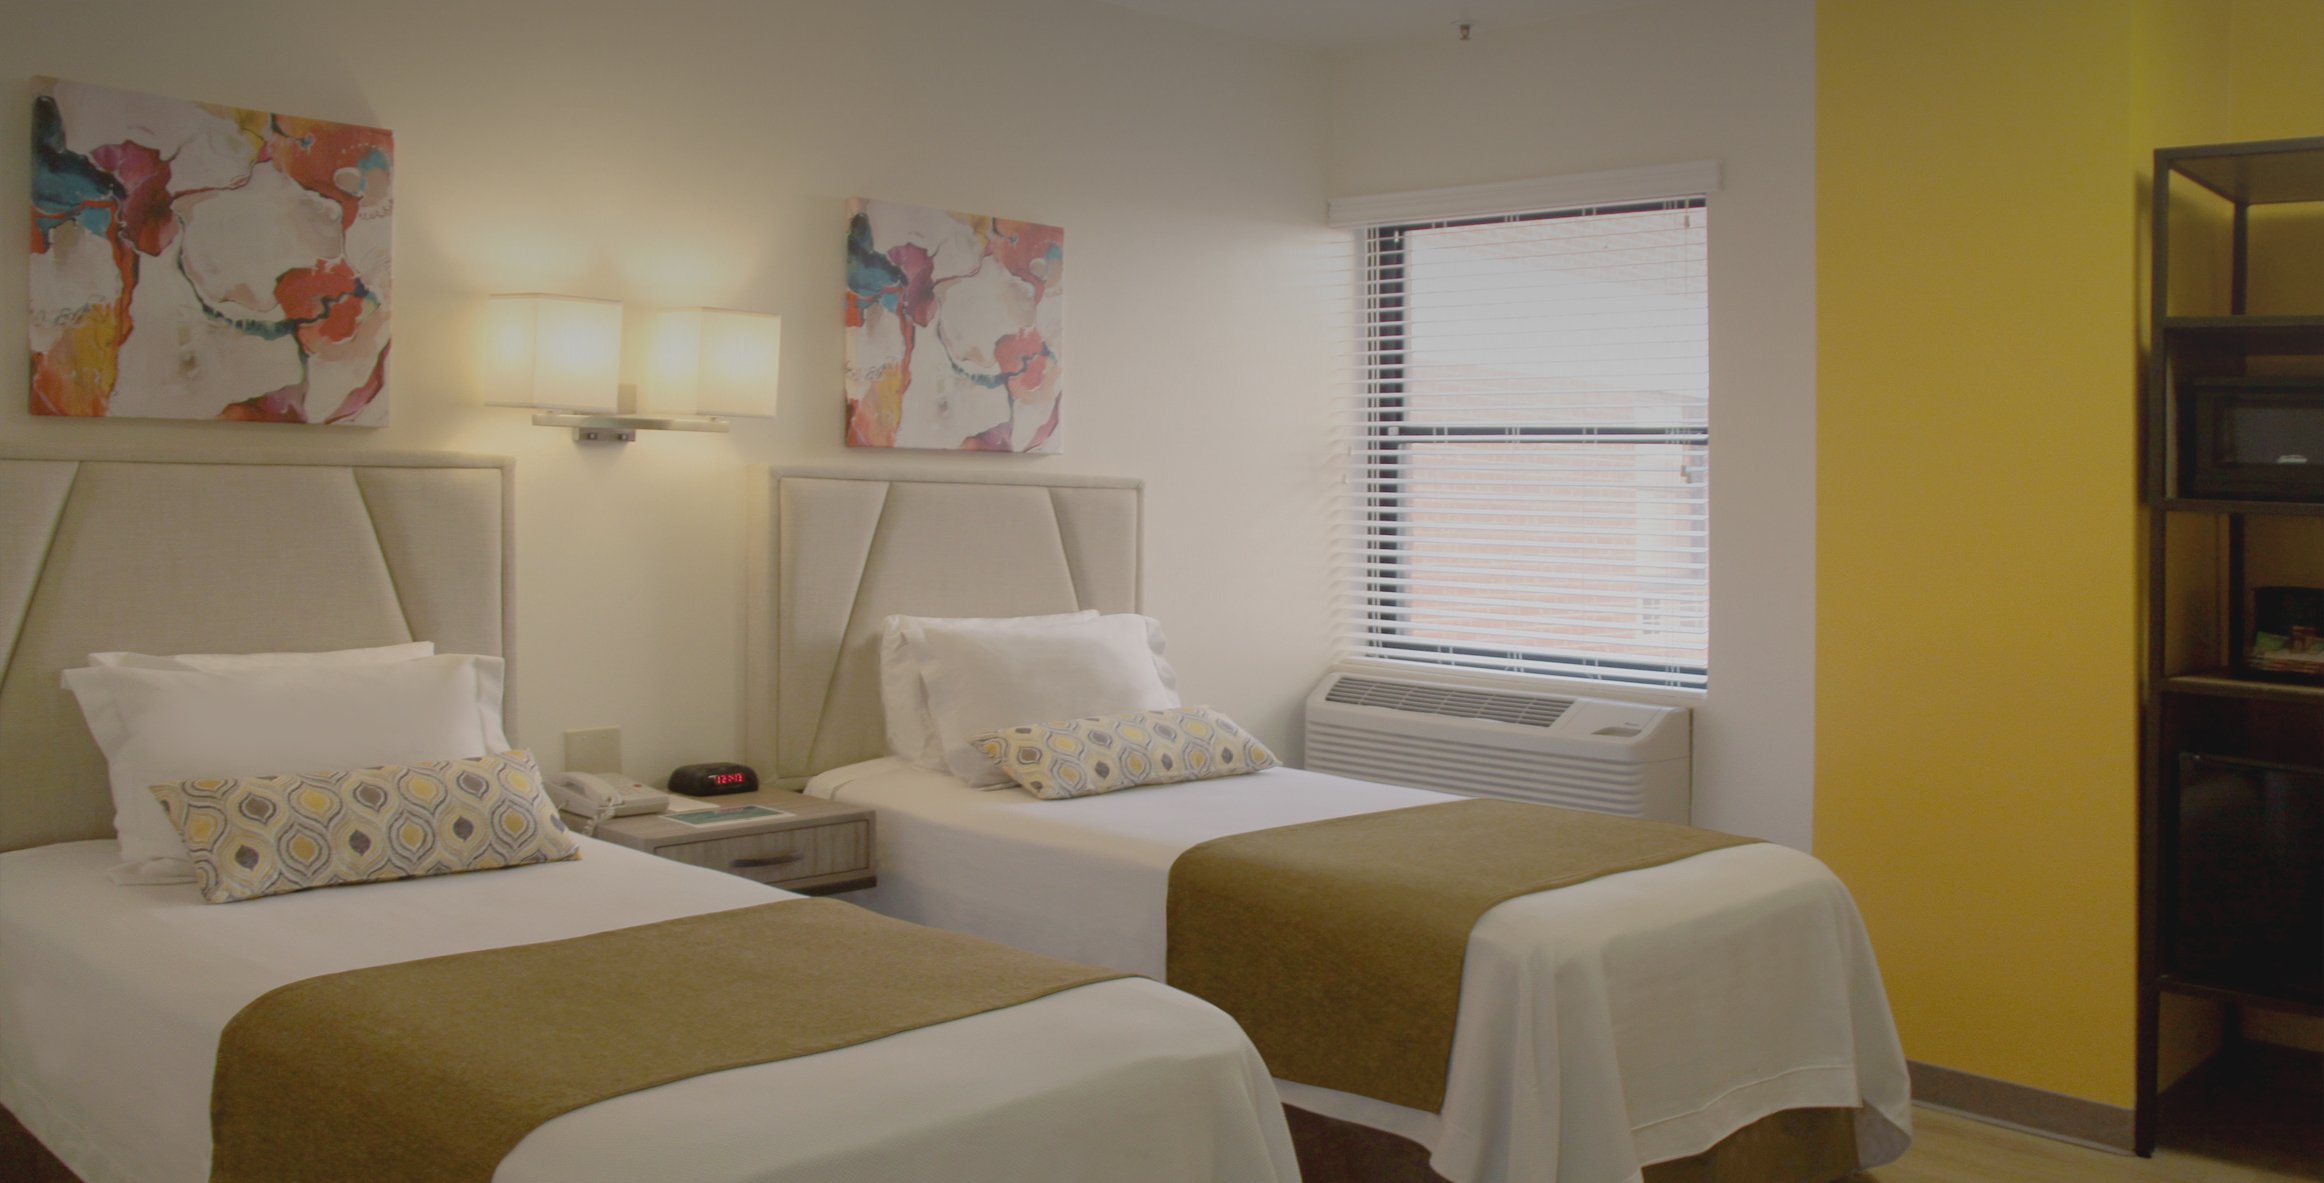 FAMILY-FRIENDLY ACCOMMODATIONS IN THE HEART OF DOWNTOWN LA